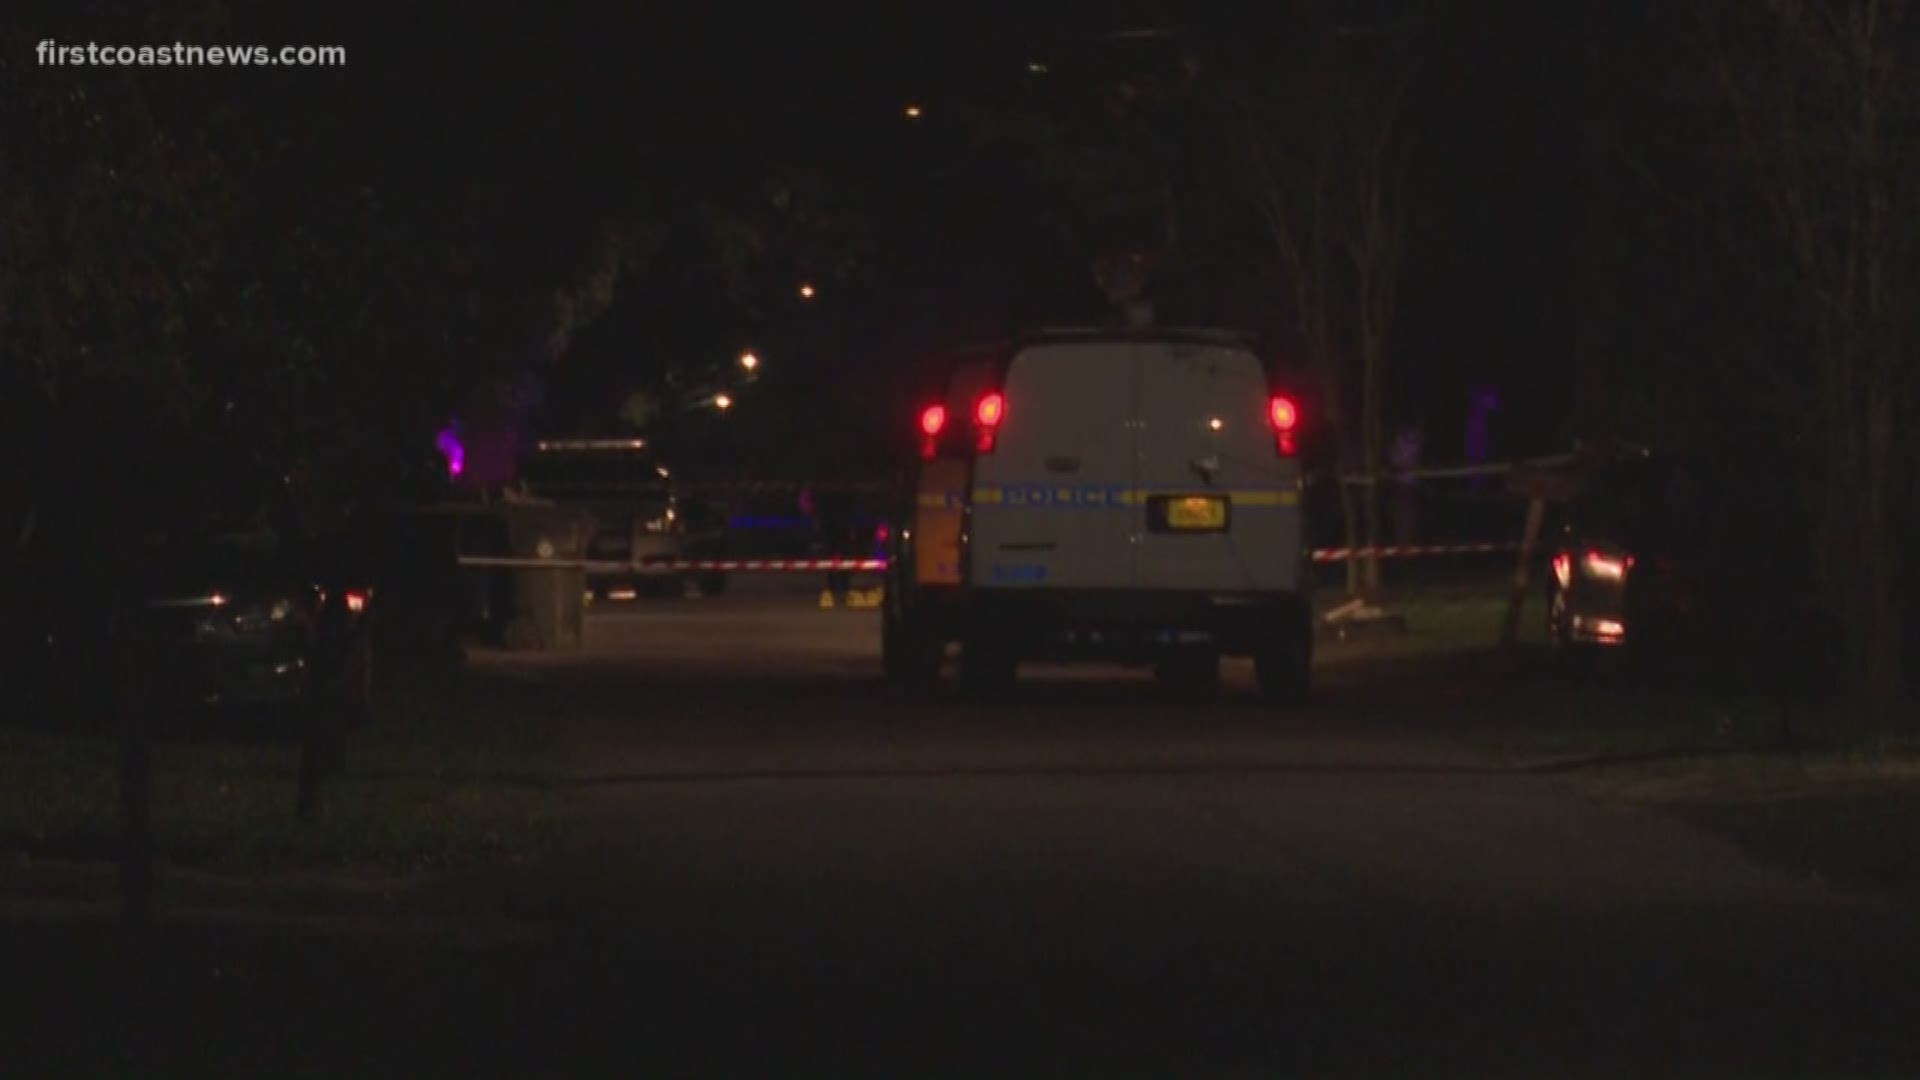 A man was found shot in the torso on the Northside, according to the Jacksonville Sheriff's Office.